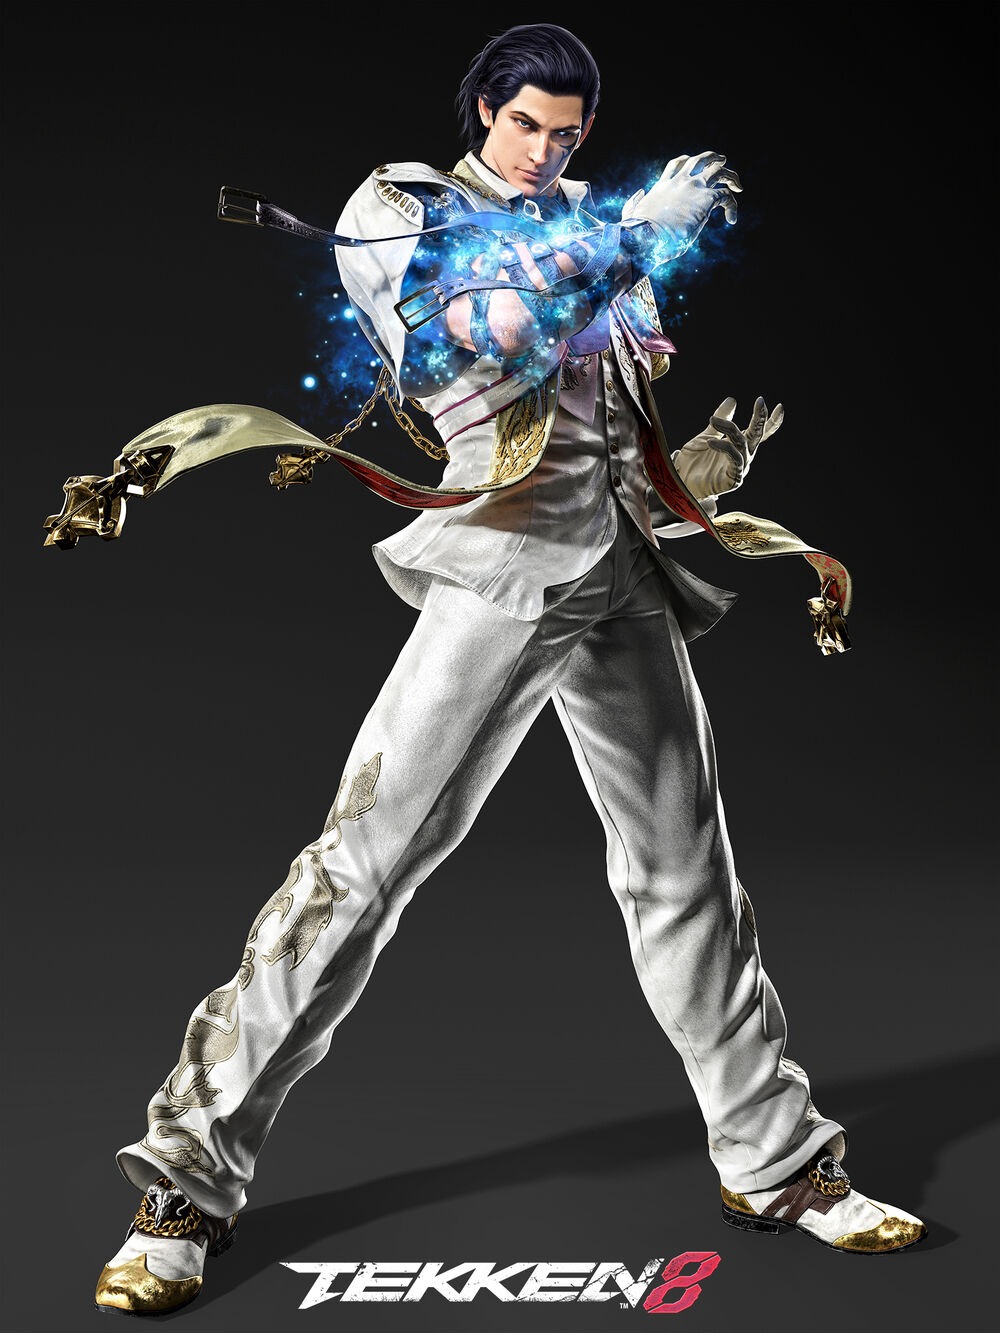 Official character render of Claudio